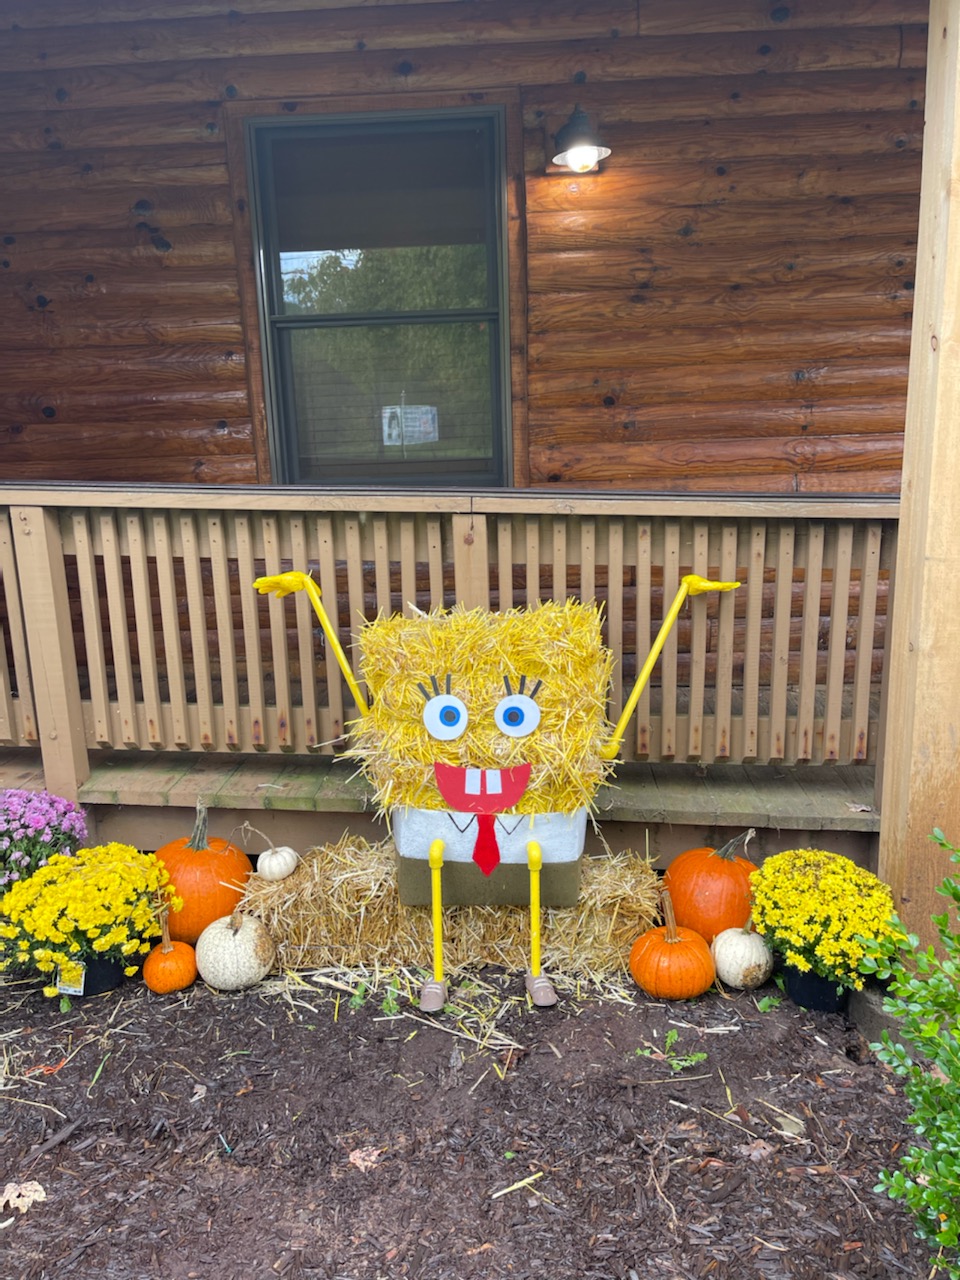 Earlville Scarecrow - Vote for Community Homes People's Choice